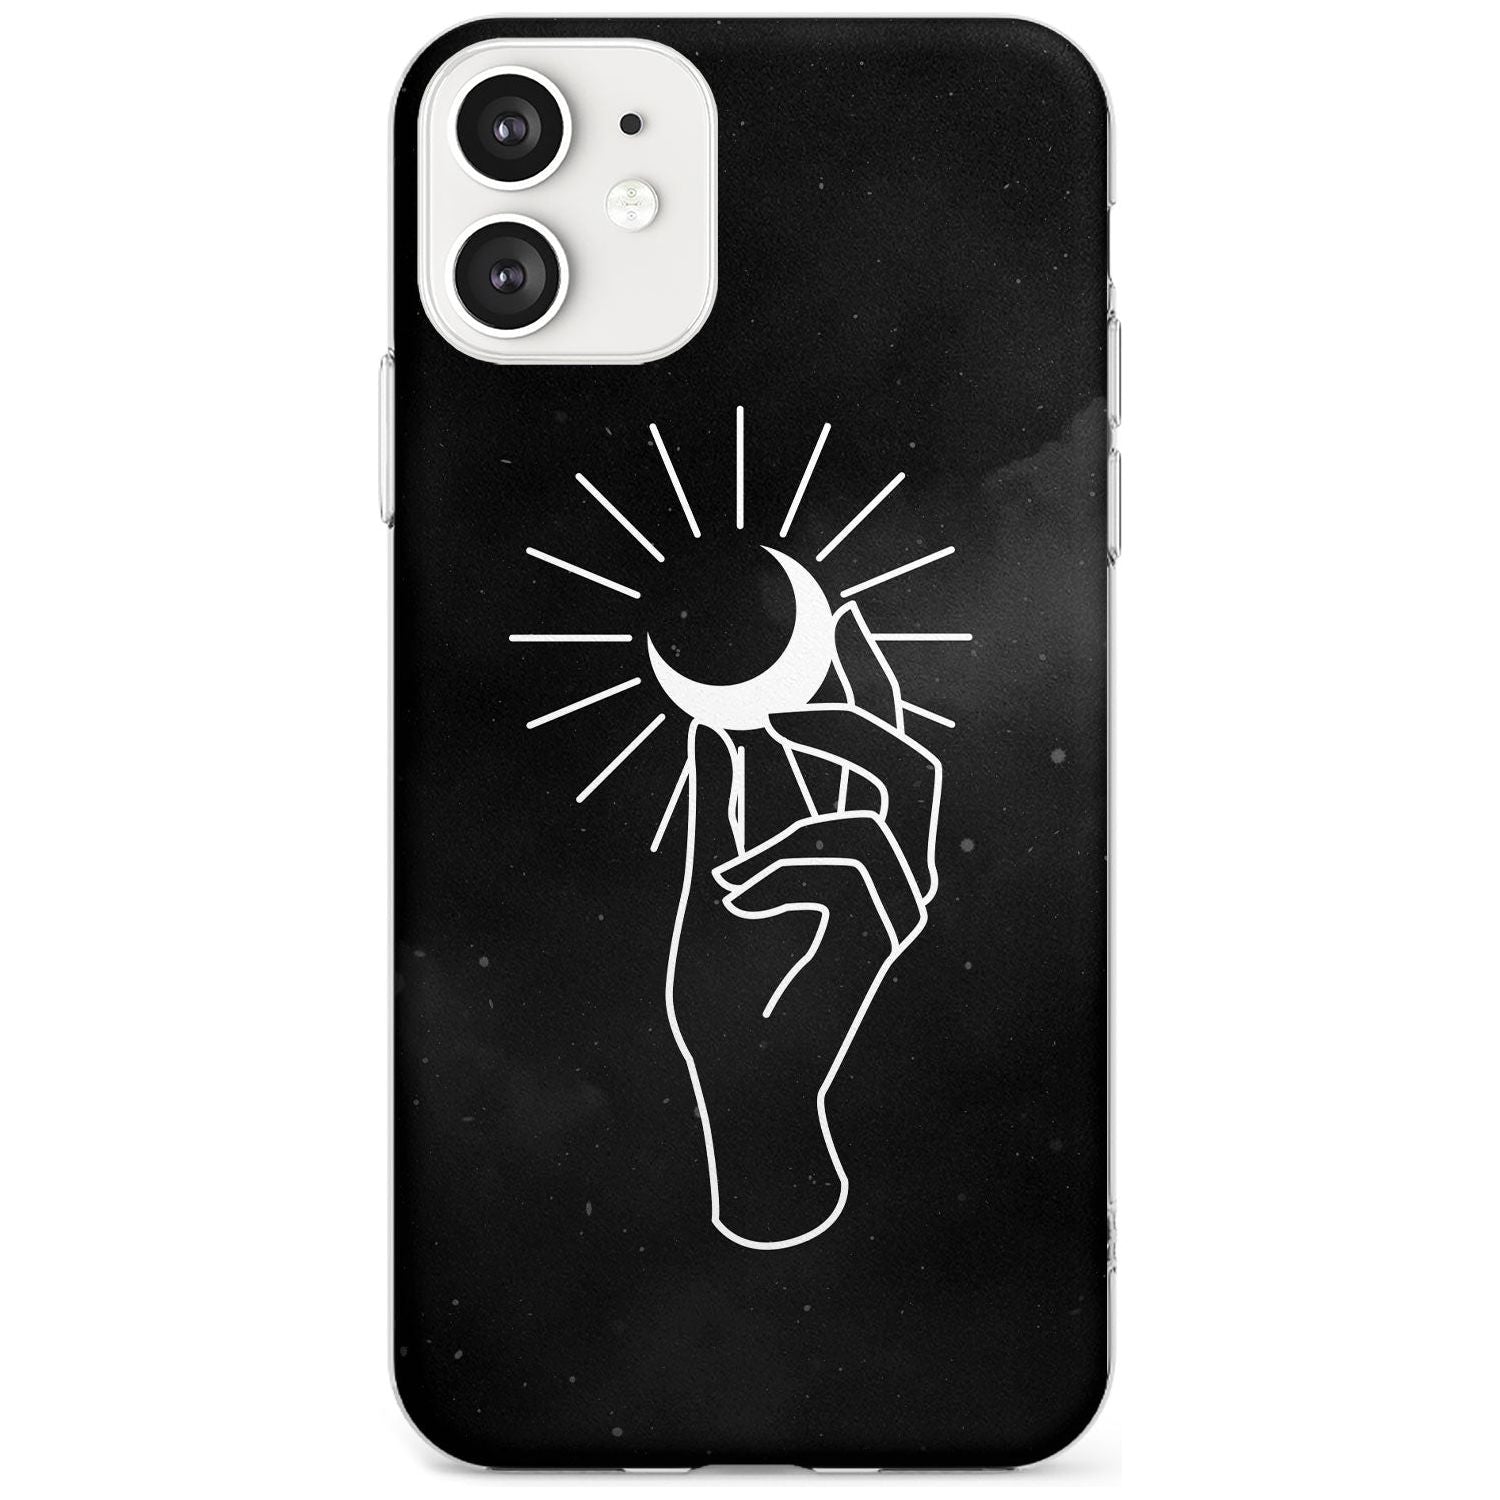 Hand Holding Moon Black Impact Phone Case for iPhone 11